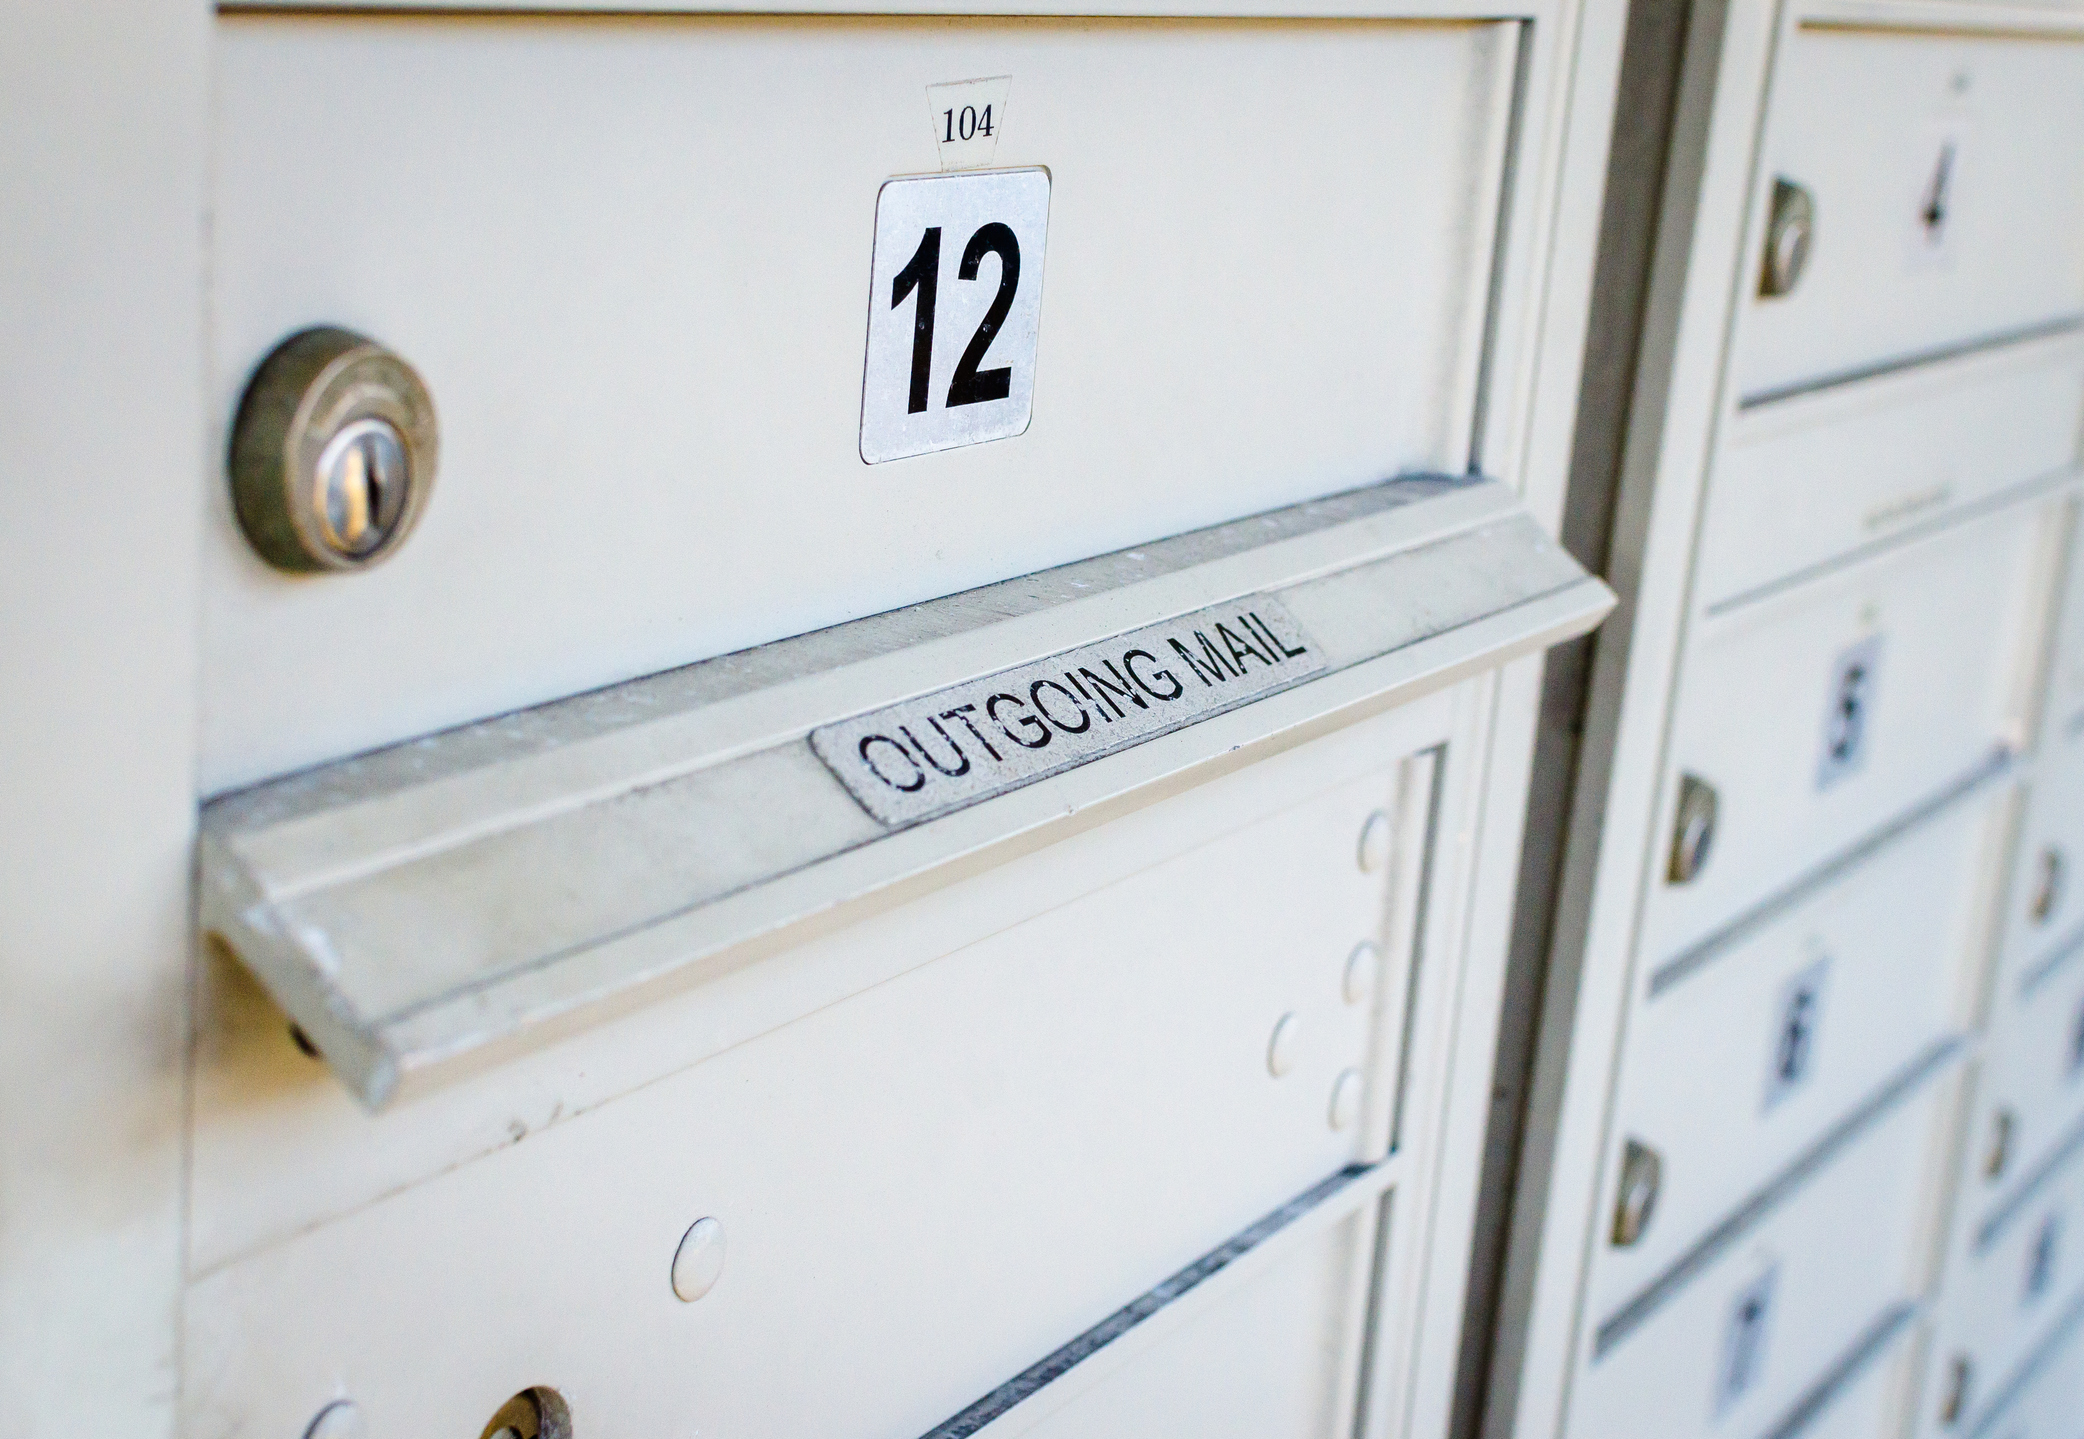 Two face felony charges in Folsom mail theft bust